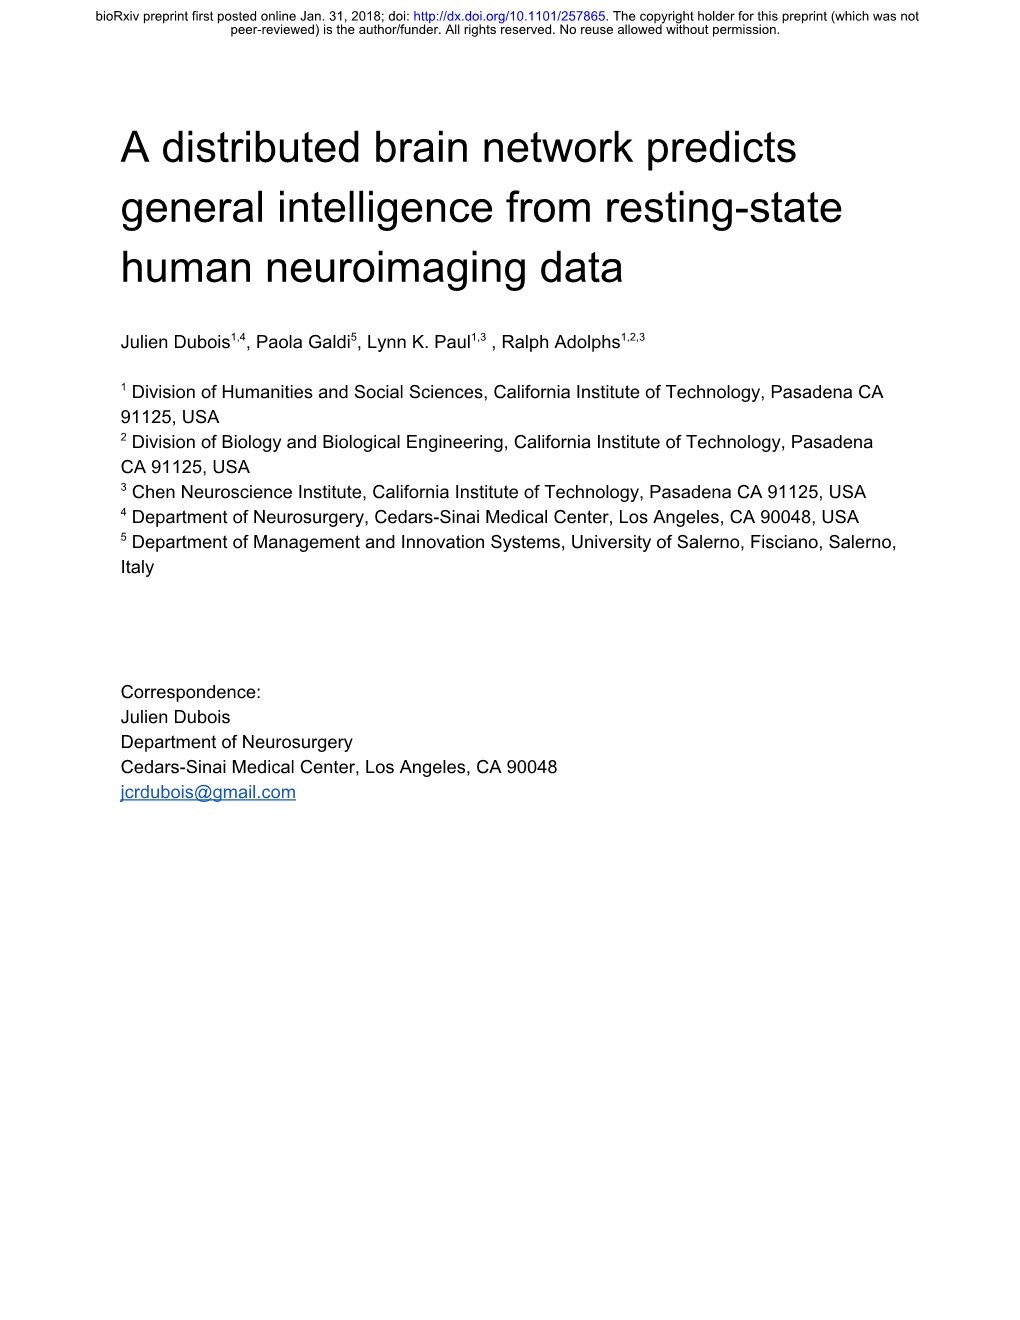 A Distributed Brain Network Predicts General Intelligence from Resting-State Human Neuroimaging Data